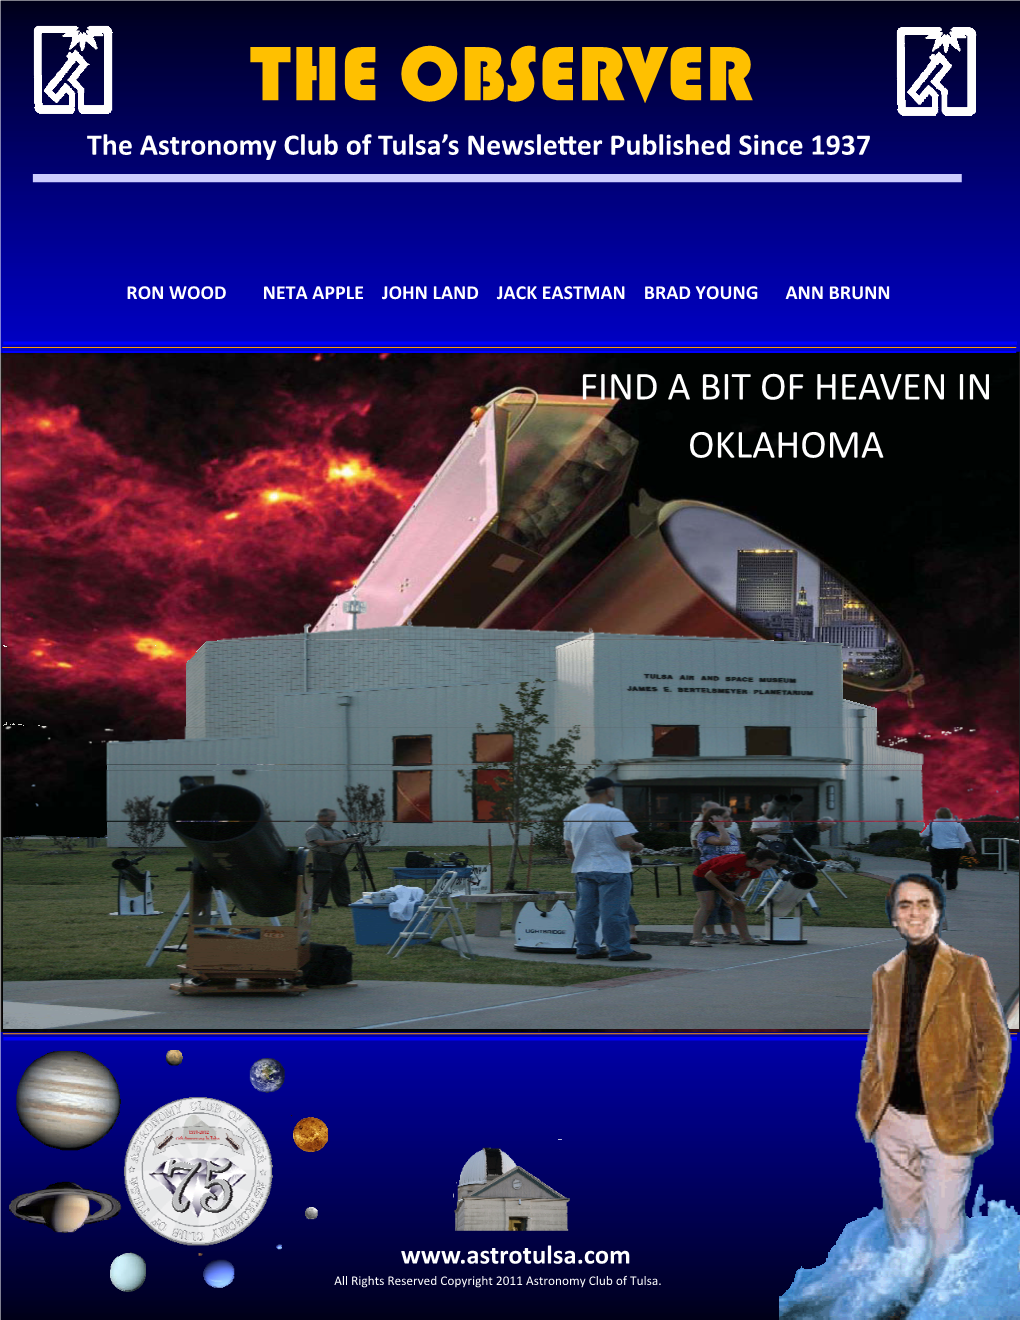 THE OBSERVER the Astronomy Club of Tulsa’S Newsle�Er Published Since 1937